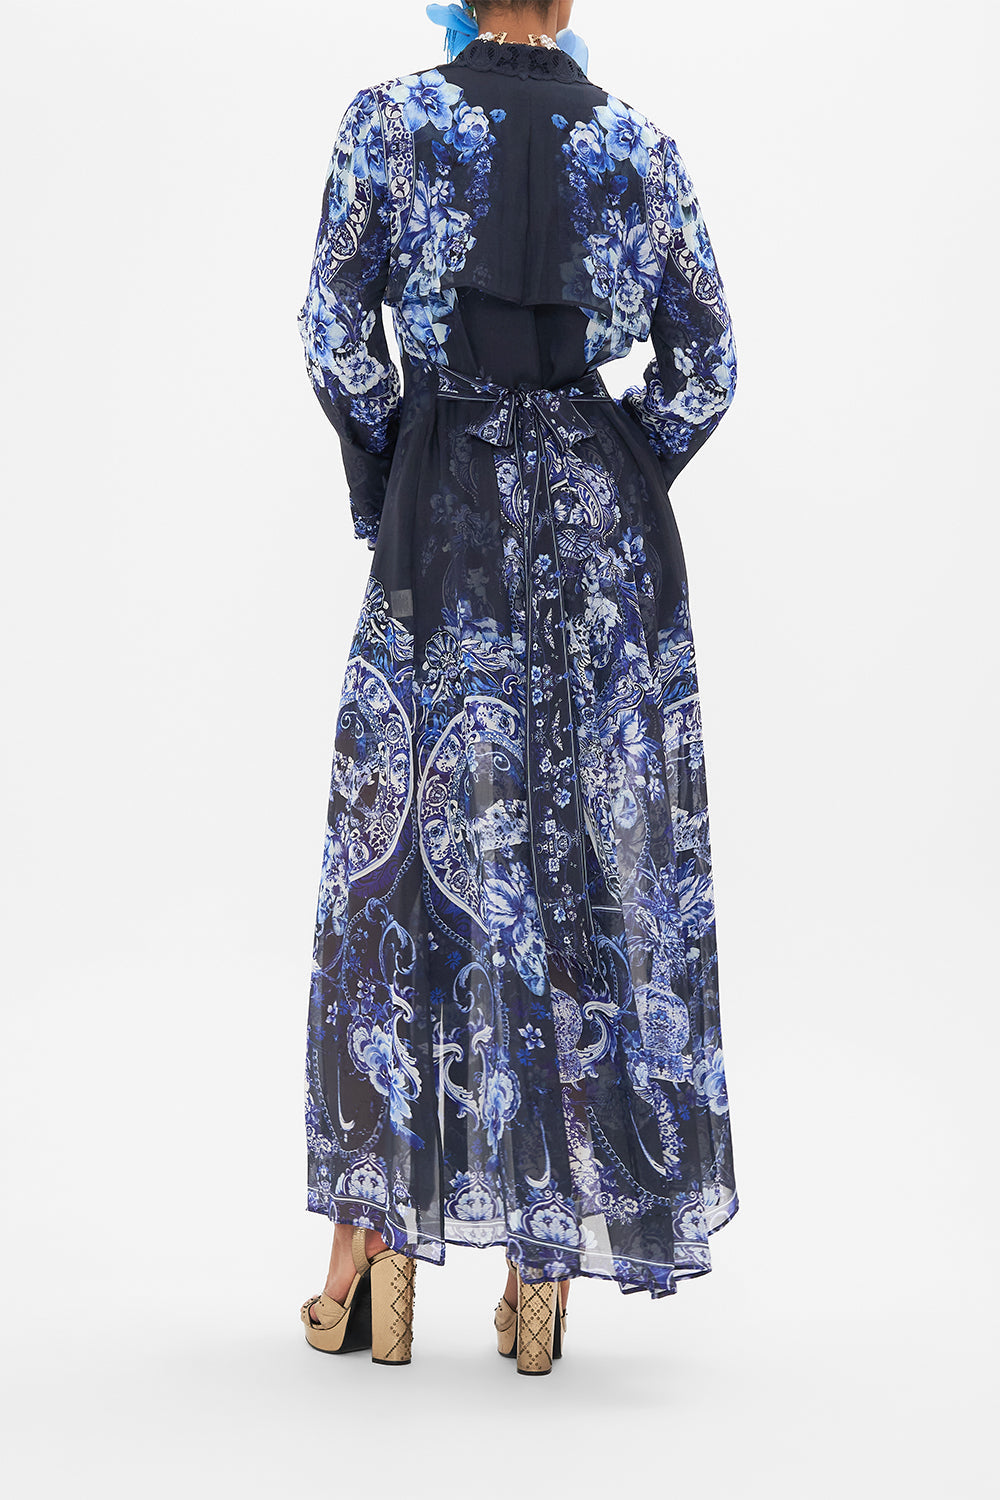 Back view of model wearing CAMILLA silk trench in Delft Dynasty print